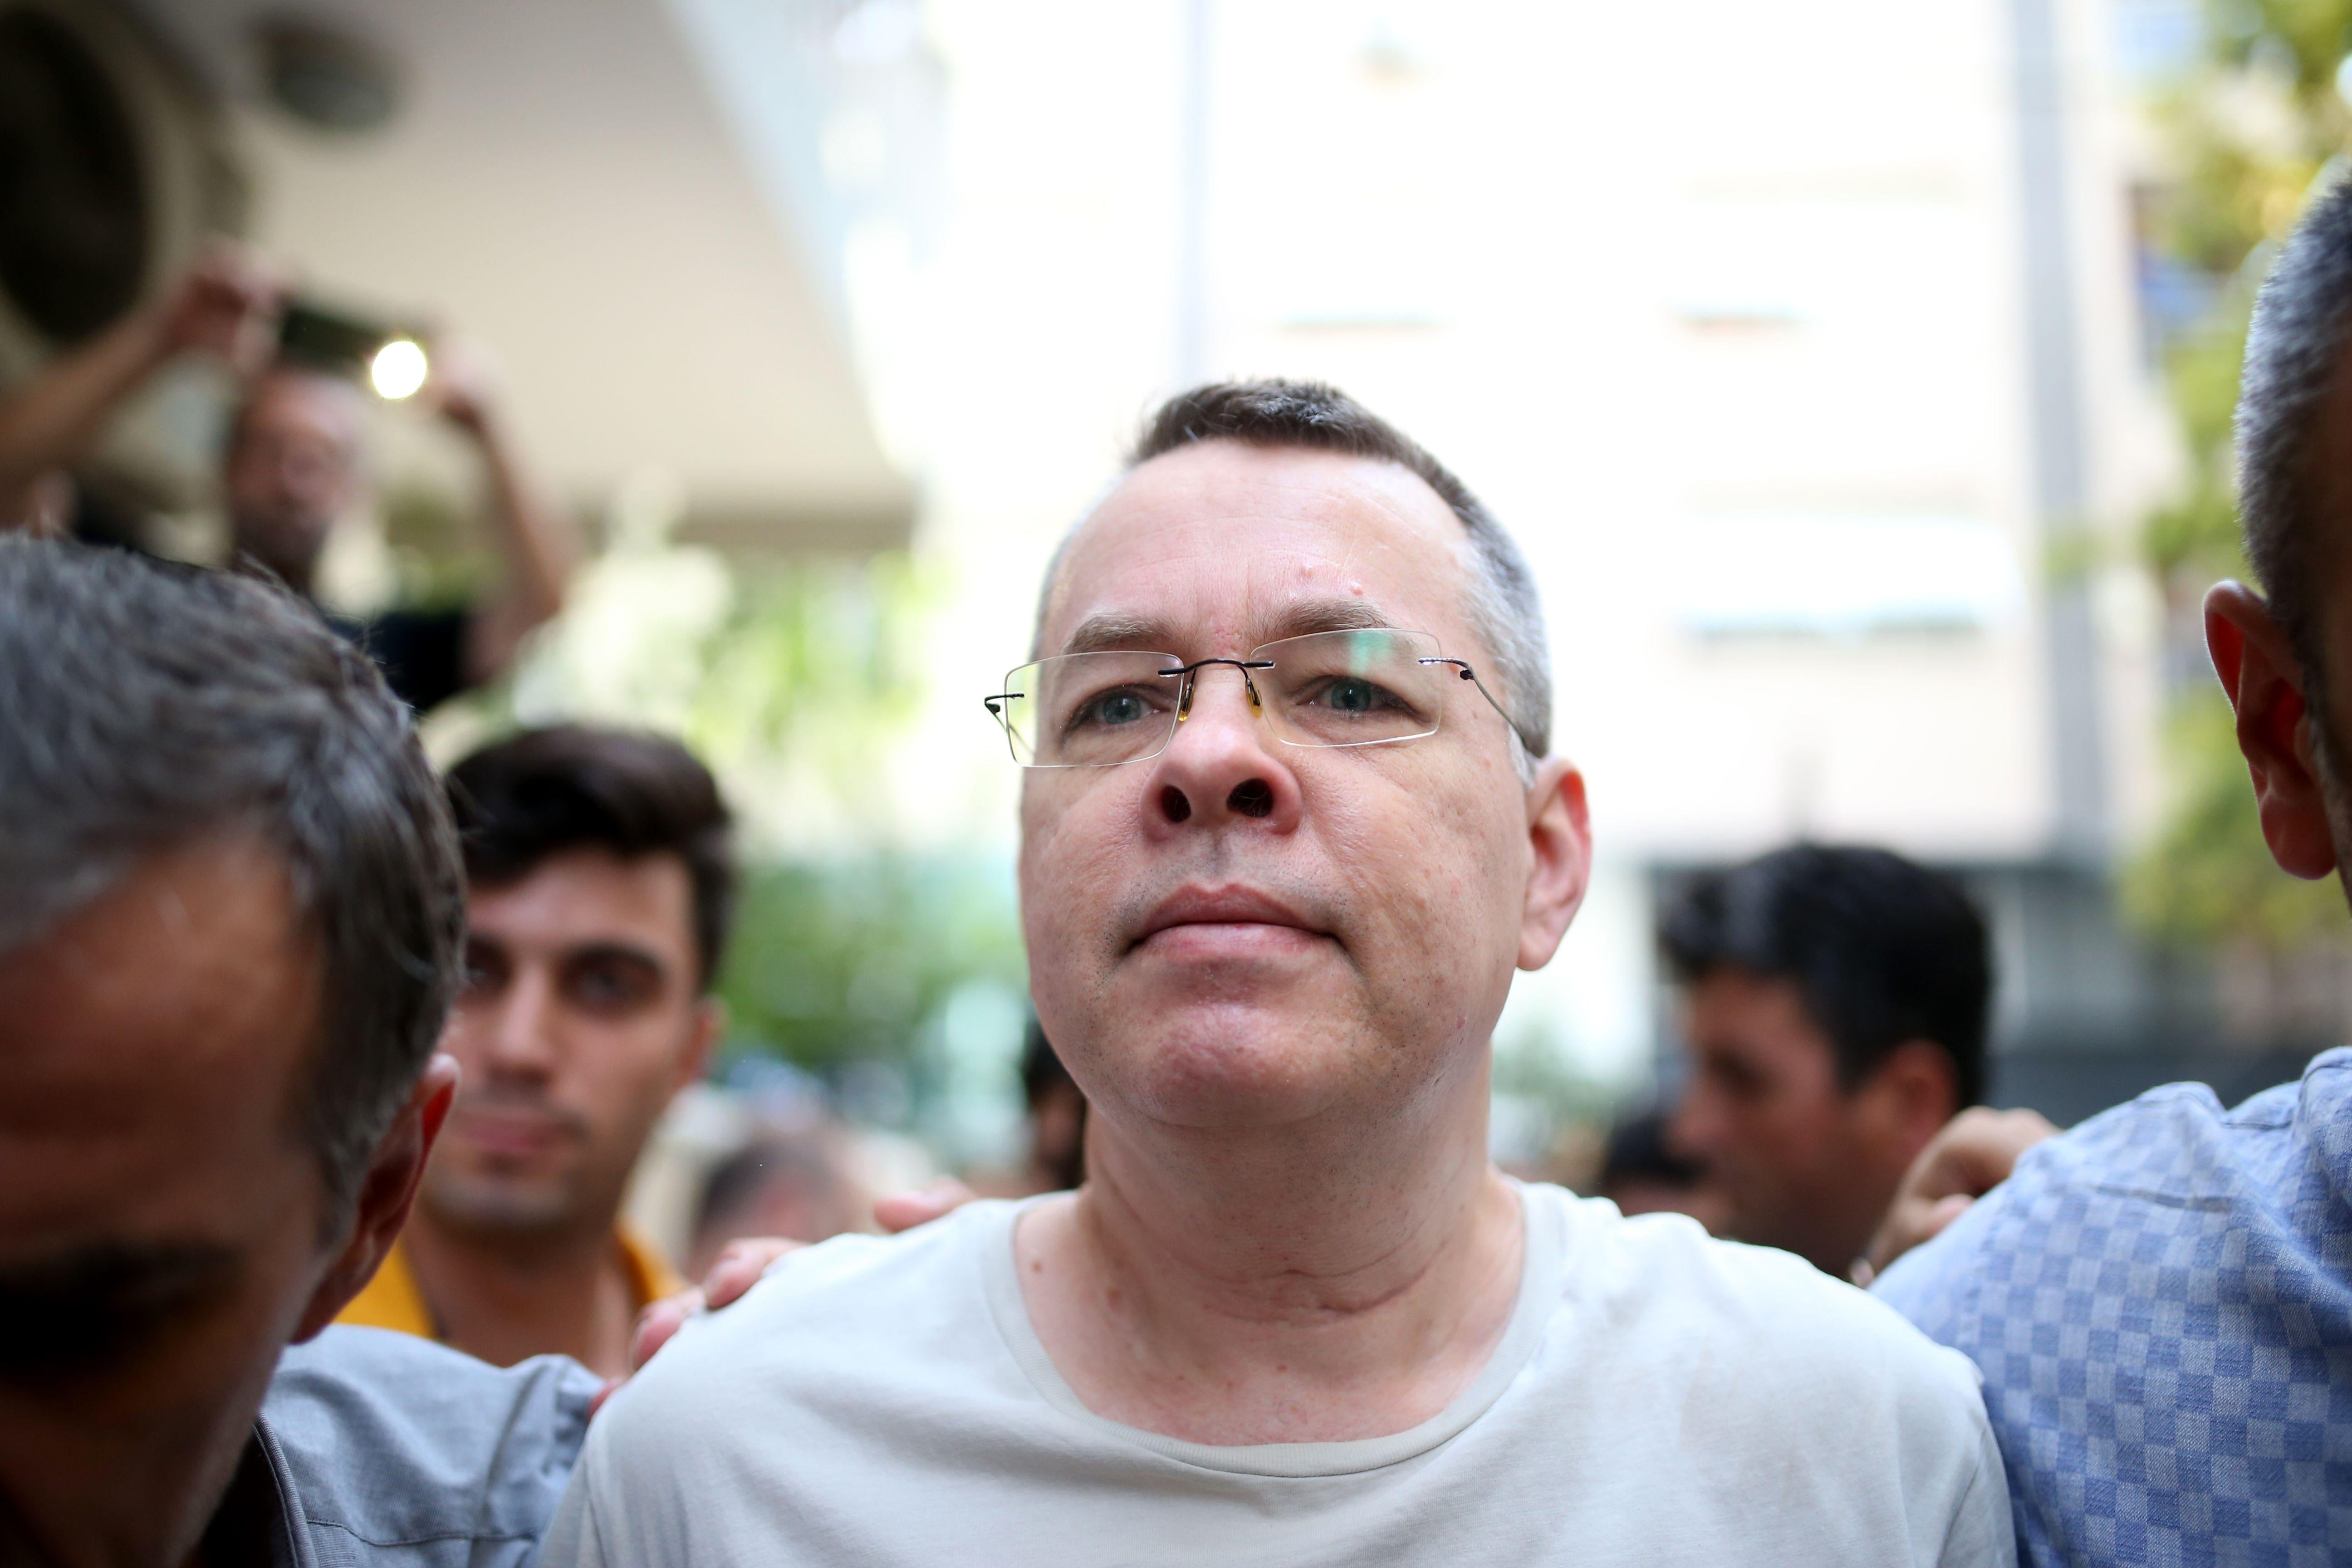 Andrew Craig Brunson escorted by Turkish plainclothes police officers